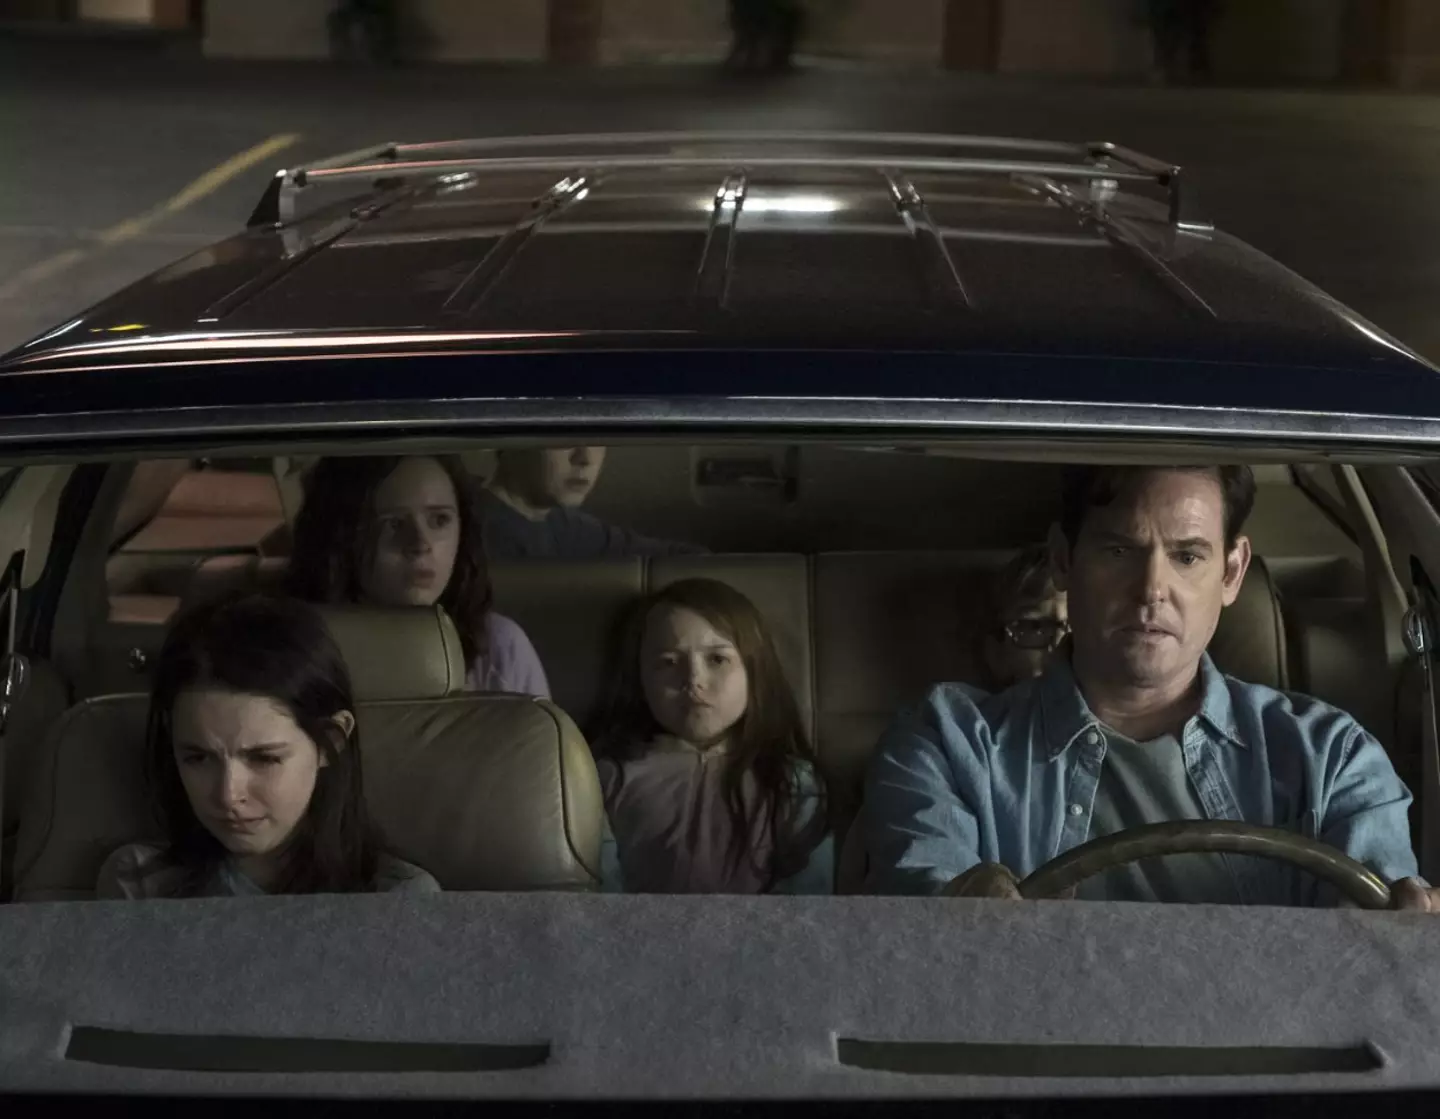 The Haunting of Hill House sees a fractured family return to their home and confront their haunted past. (Steve Dietl/Netflix)